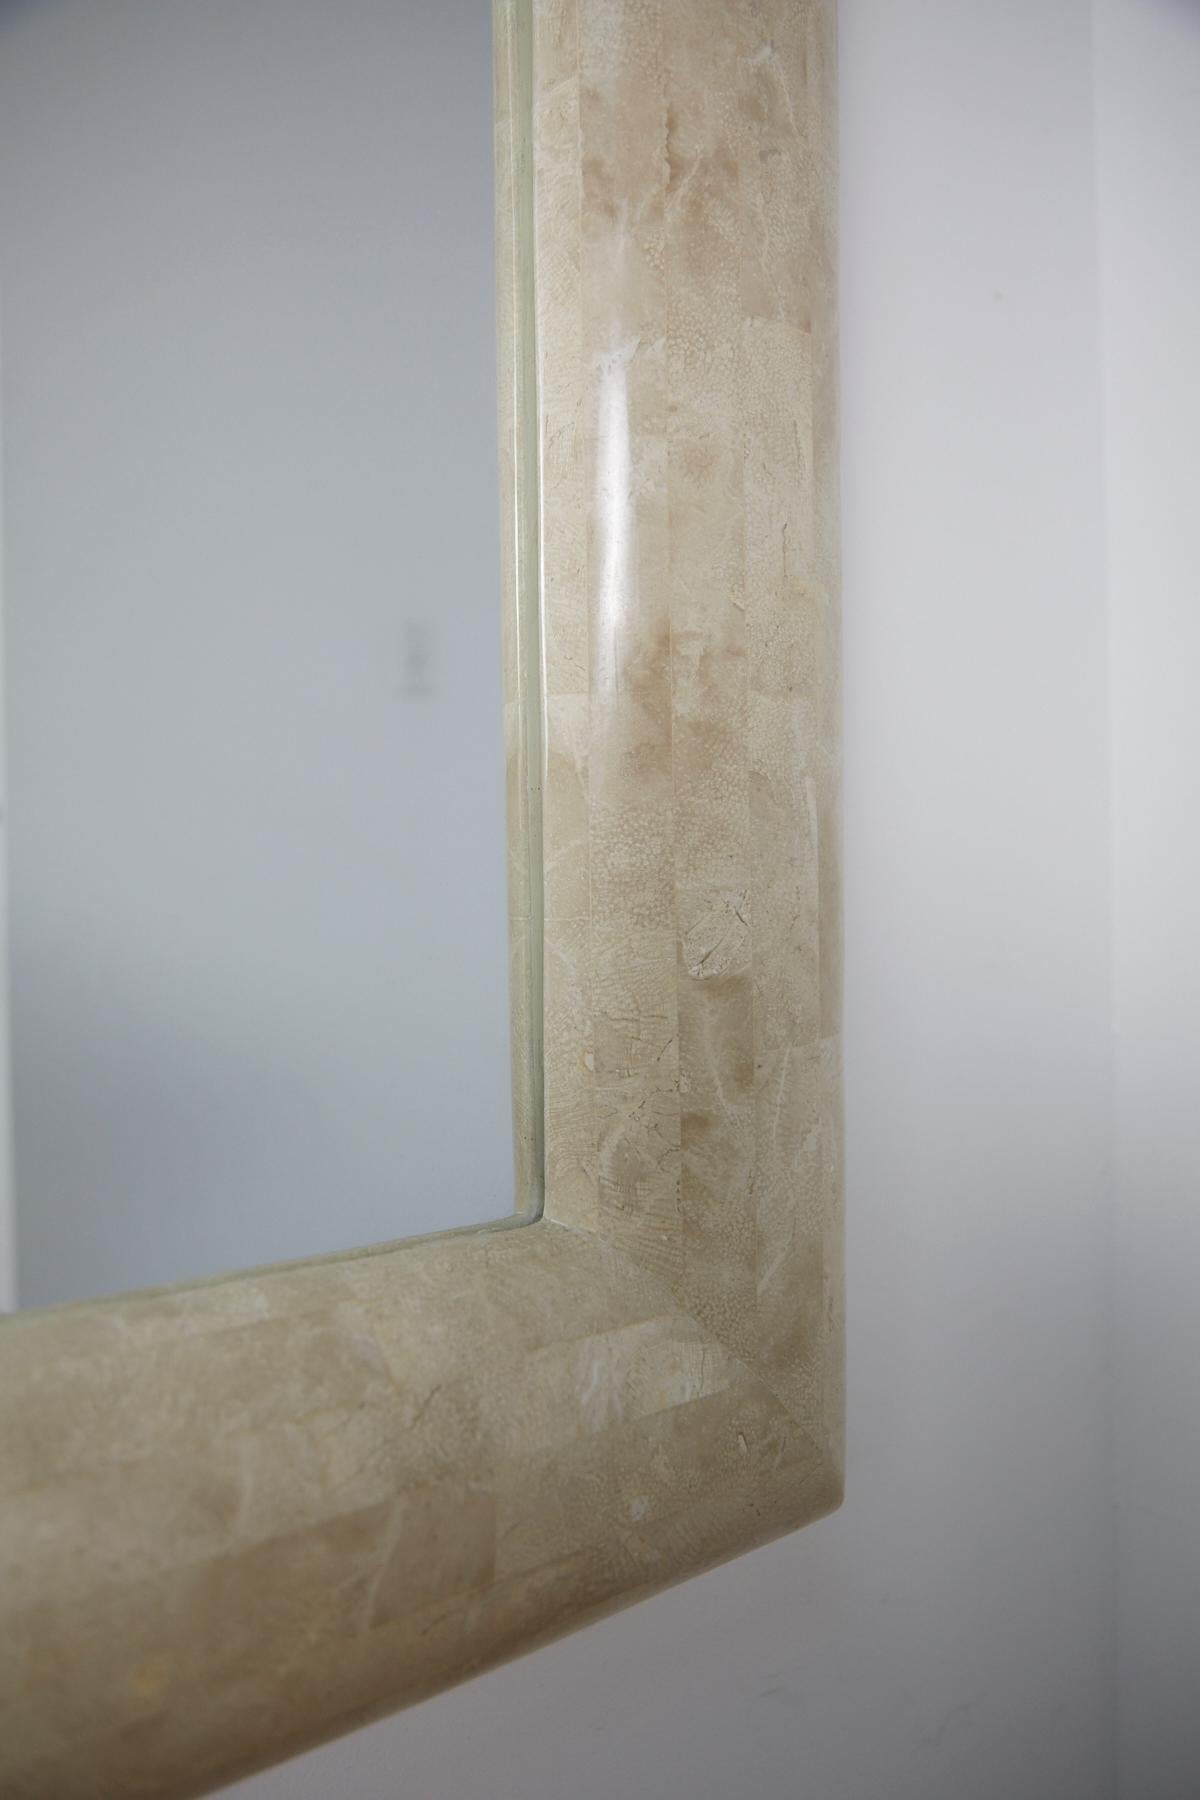 Large rectangular mirror with frame completely covered in inlaid light beige fossil stone. Thick 5